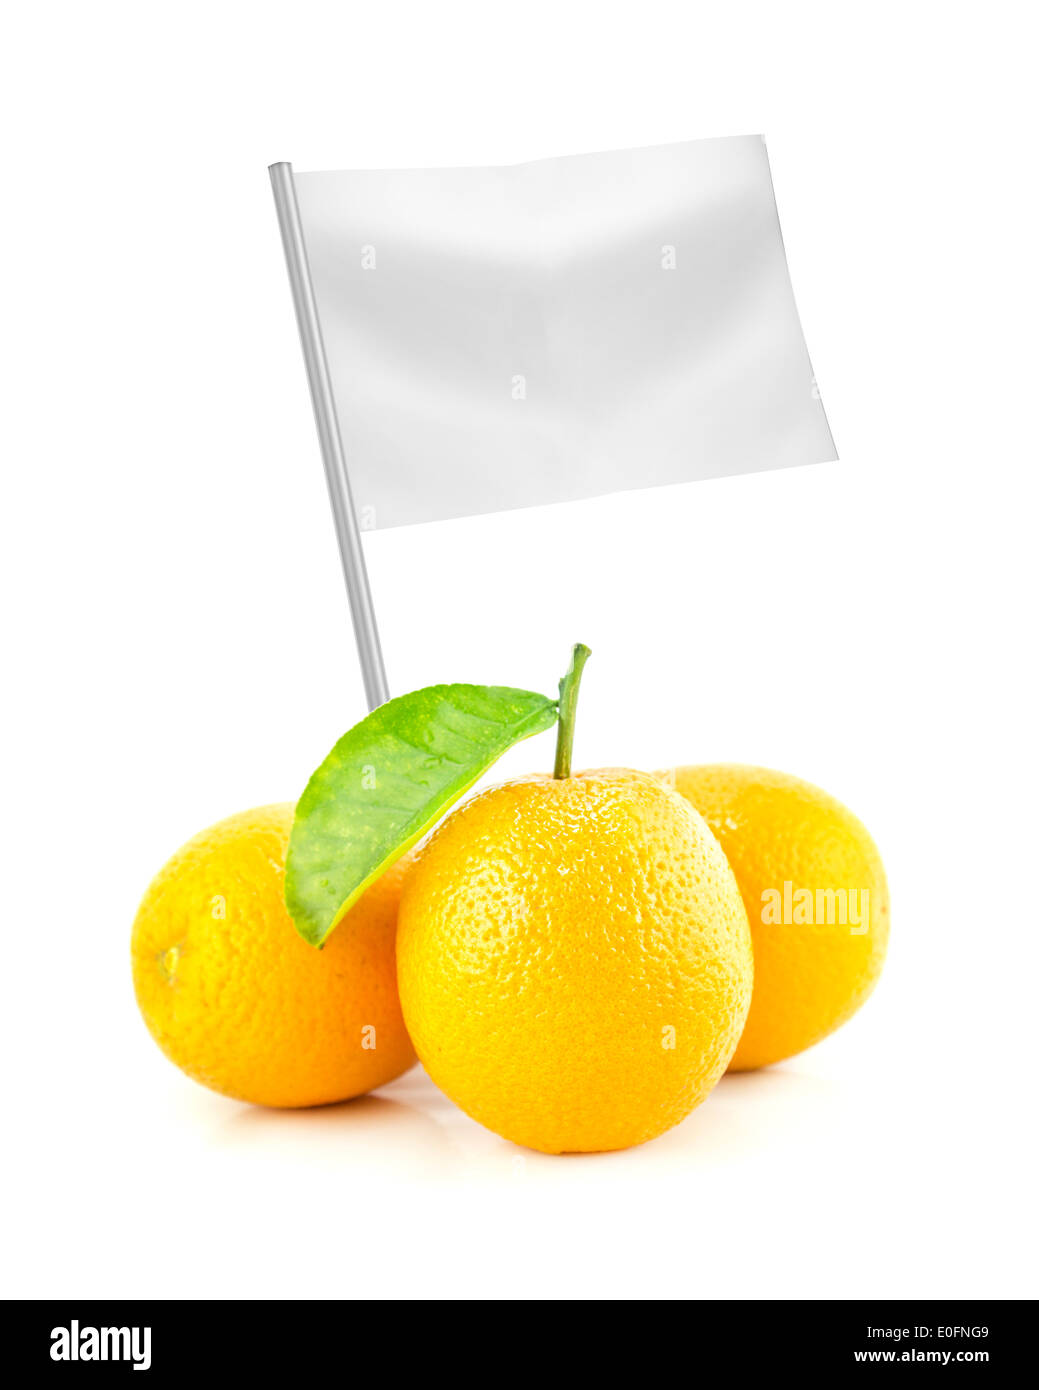 Healthy and organic food concept. Fresh Orange with flag showing the benefits or the price of fruits. Stock Photo